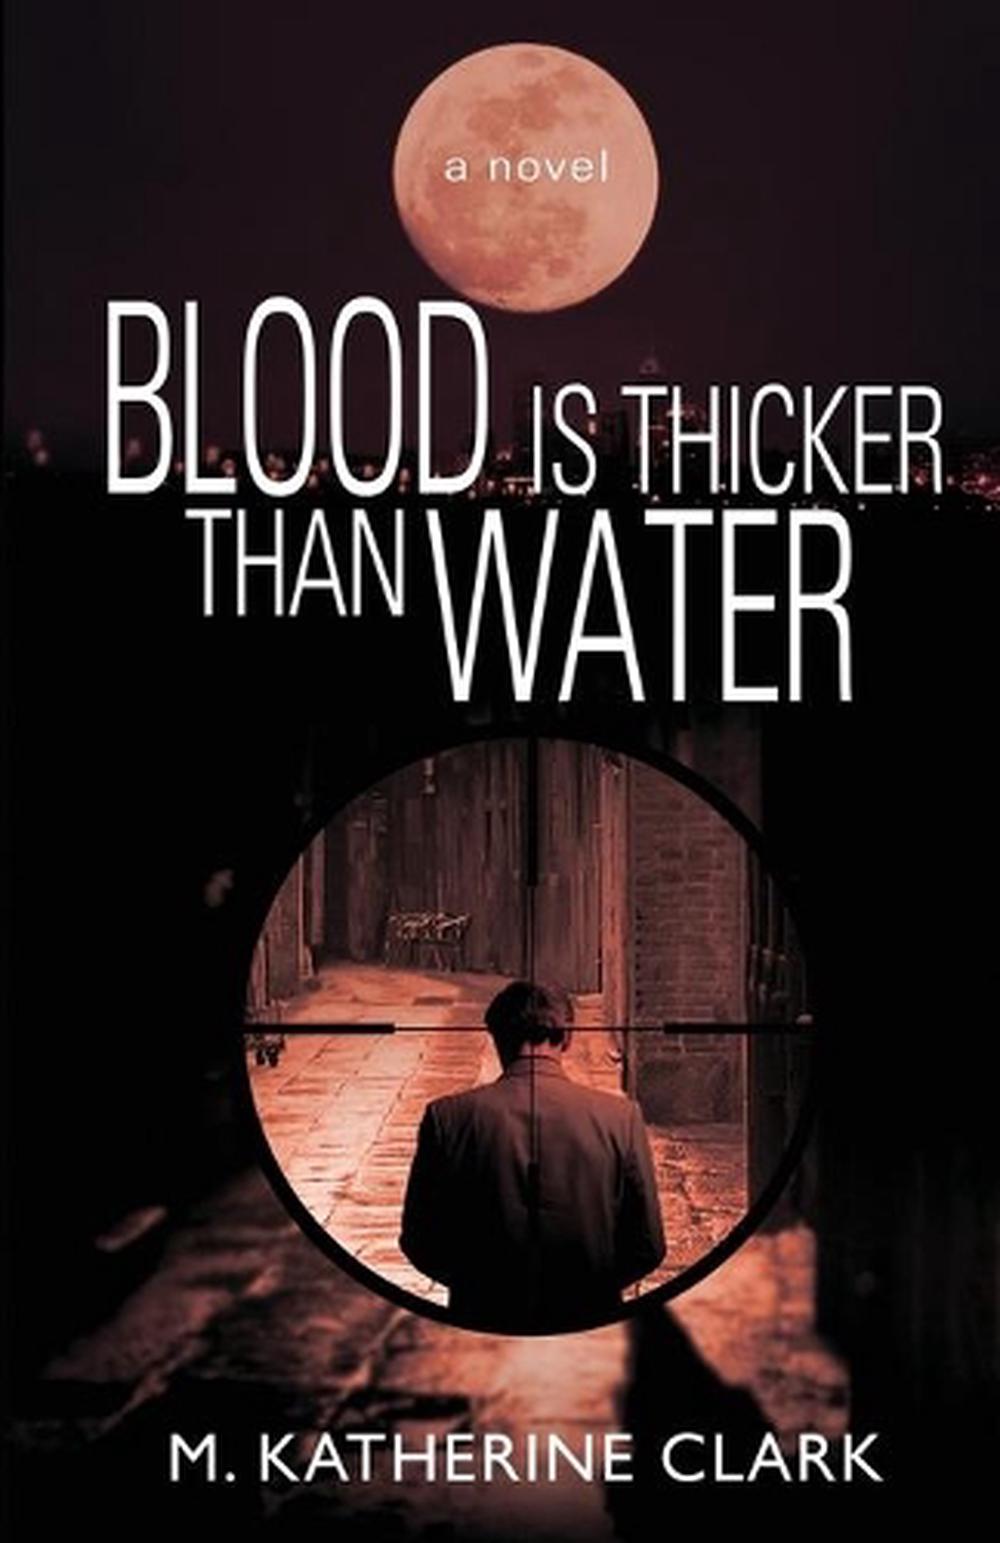 essay about blood is thicker than water